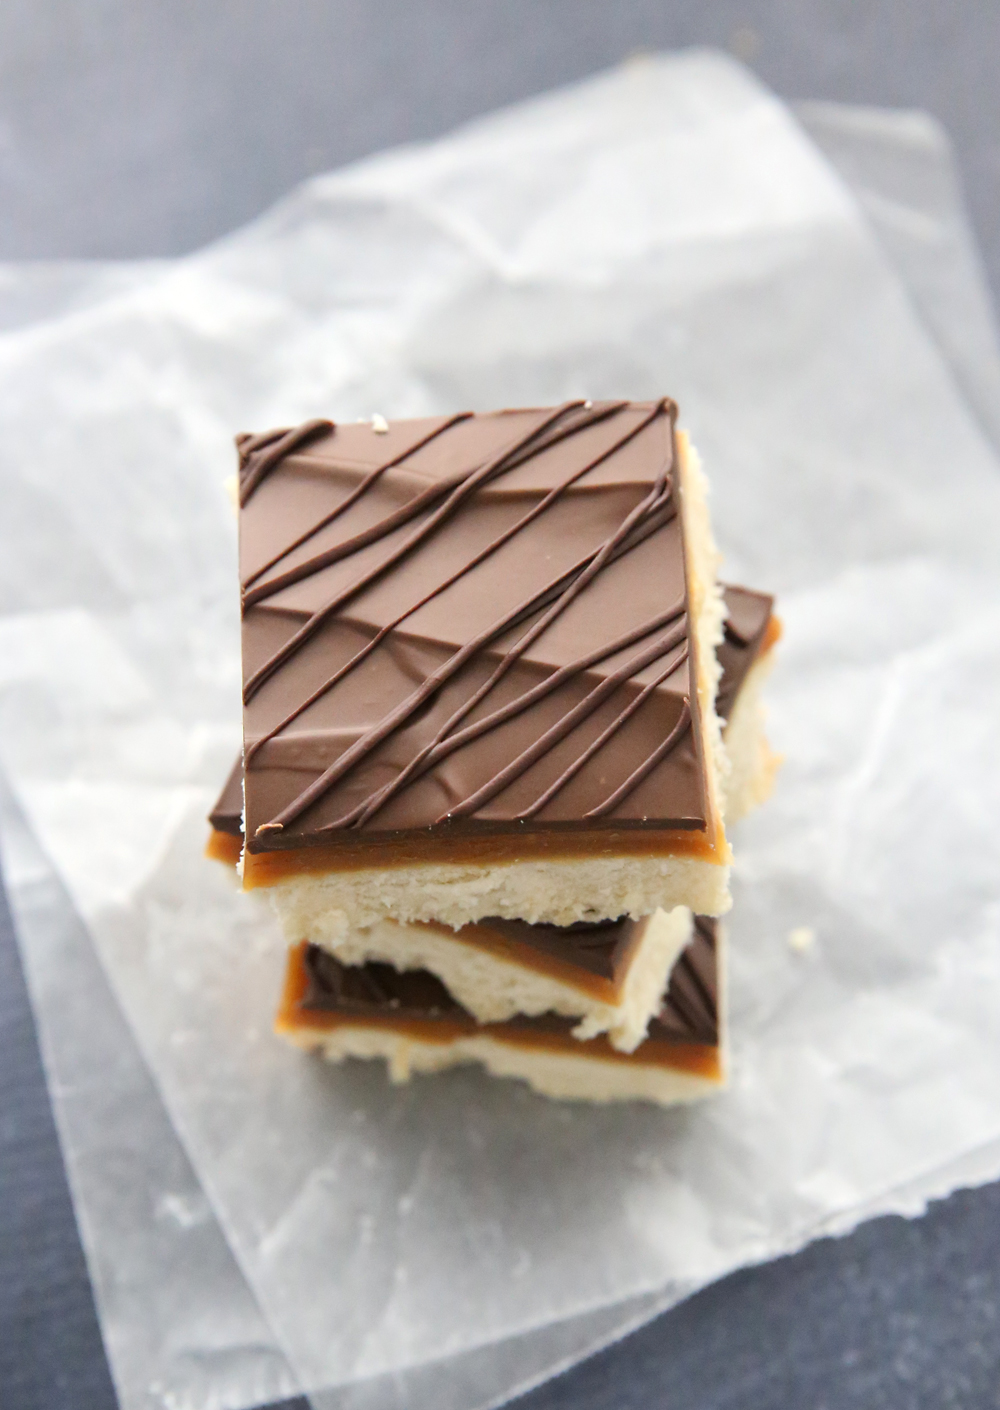 Chocolate layer on top of caramel and shortbread.